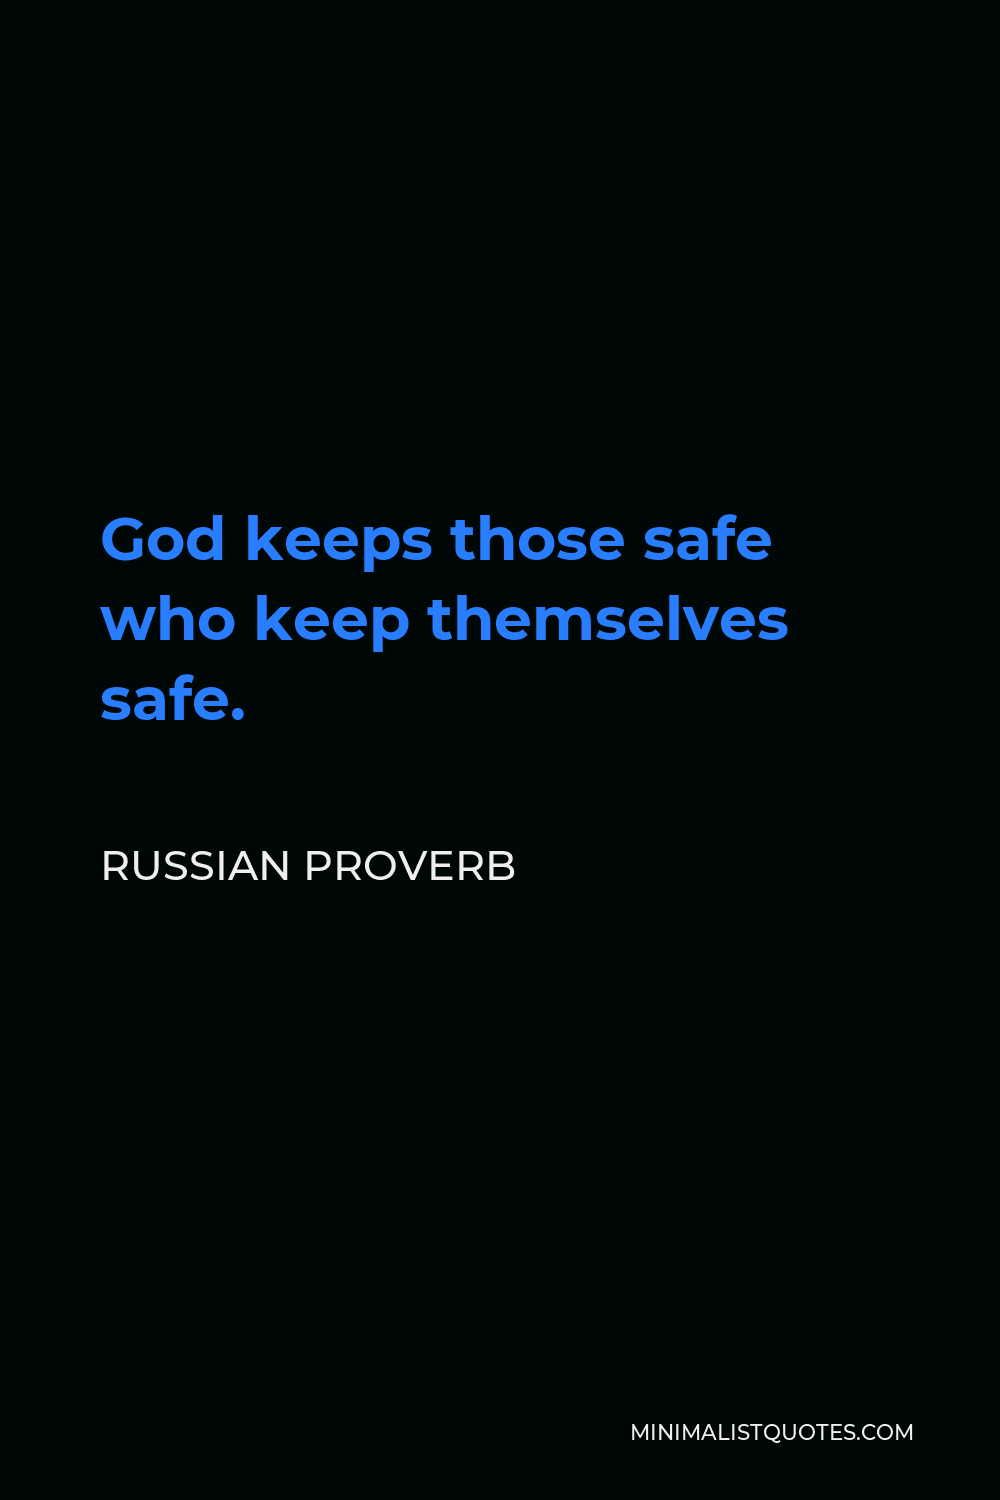 Russian Proverb Quote - God keeps those safe who keep themselves safe.